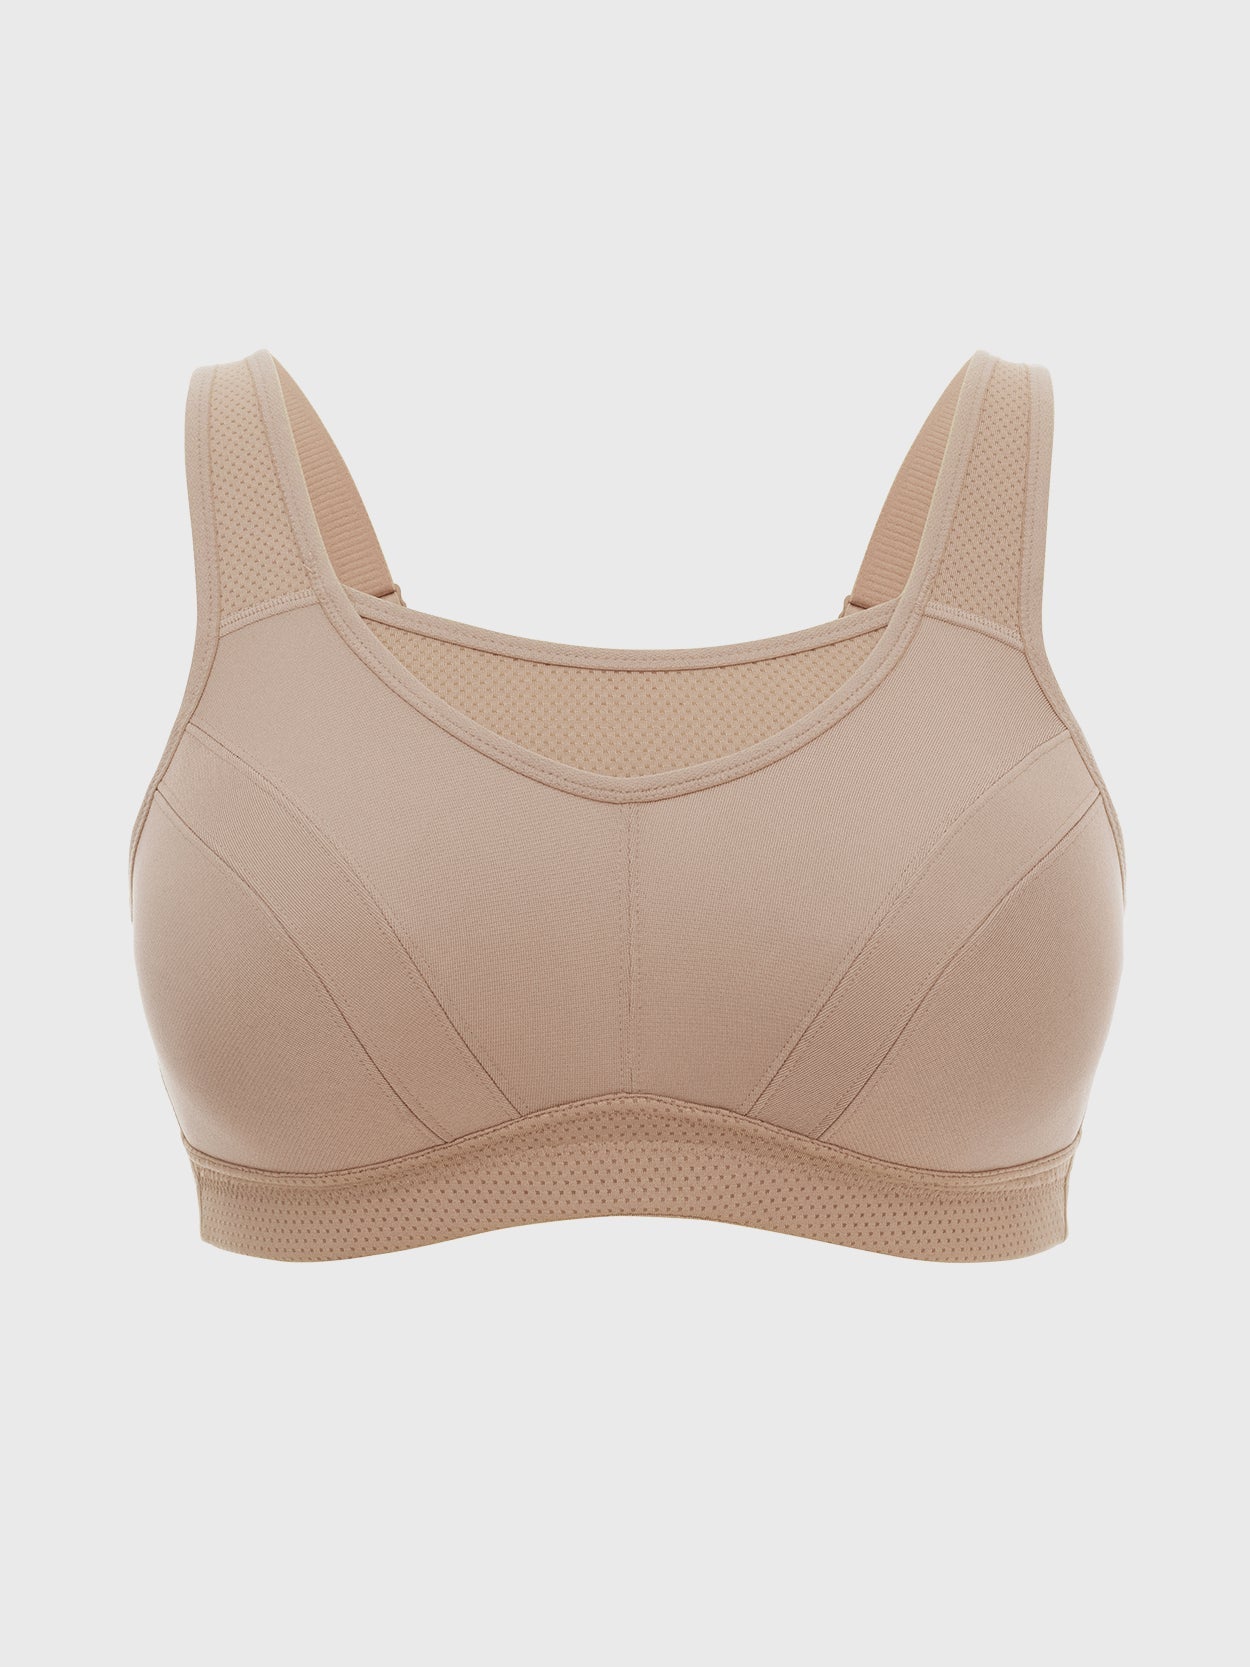 Women's Full Coverage High Impact Sports Bra, Wirefree Hollow Out Thin  Padded Comfortable Breathable Solid Color Breast Support U-shaped Bras  Bounce